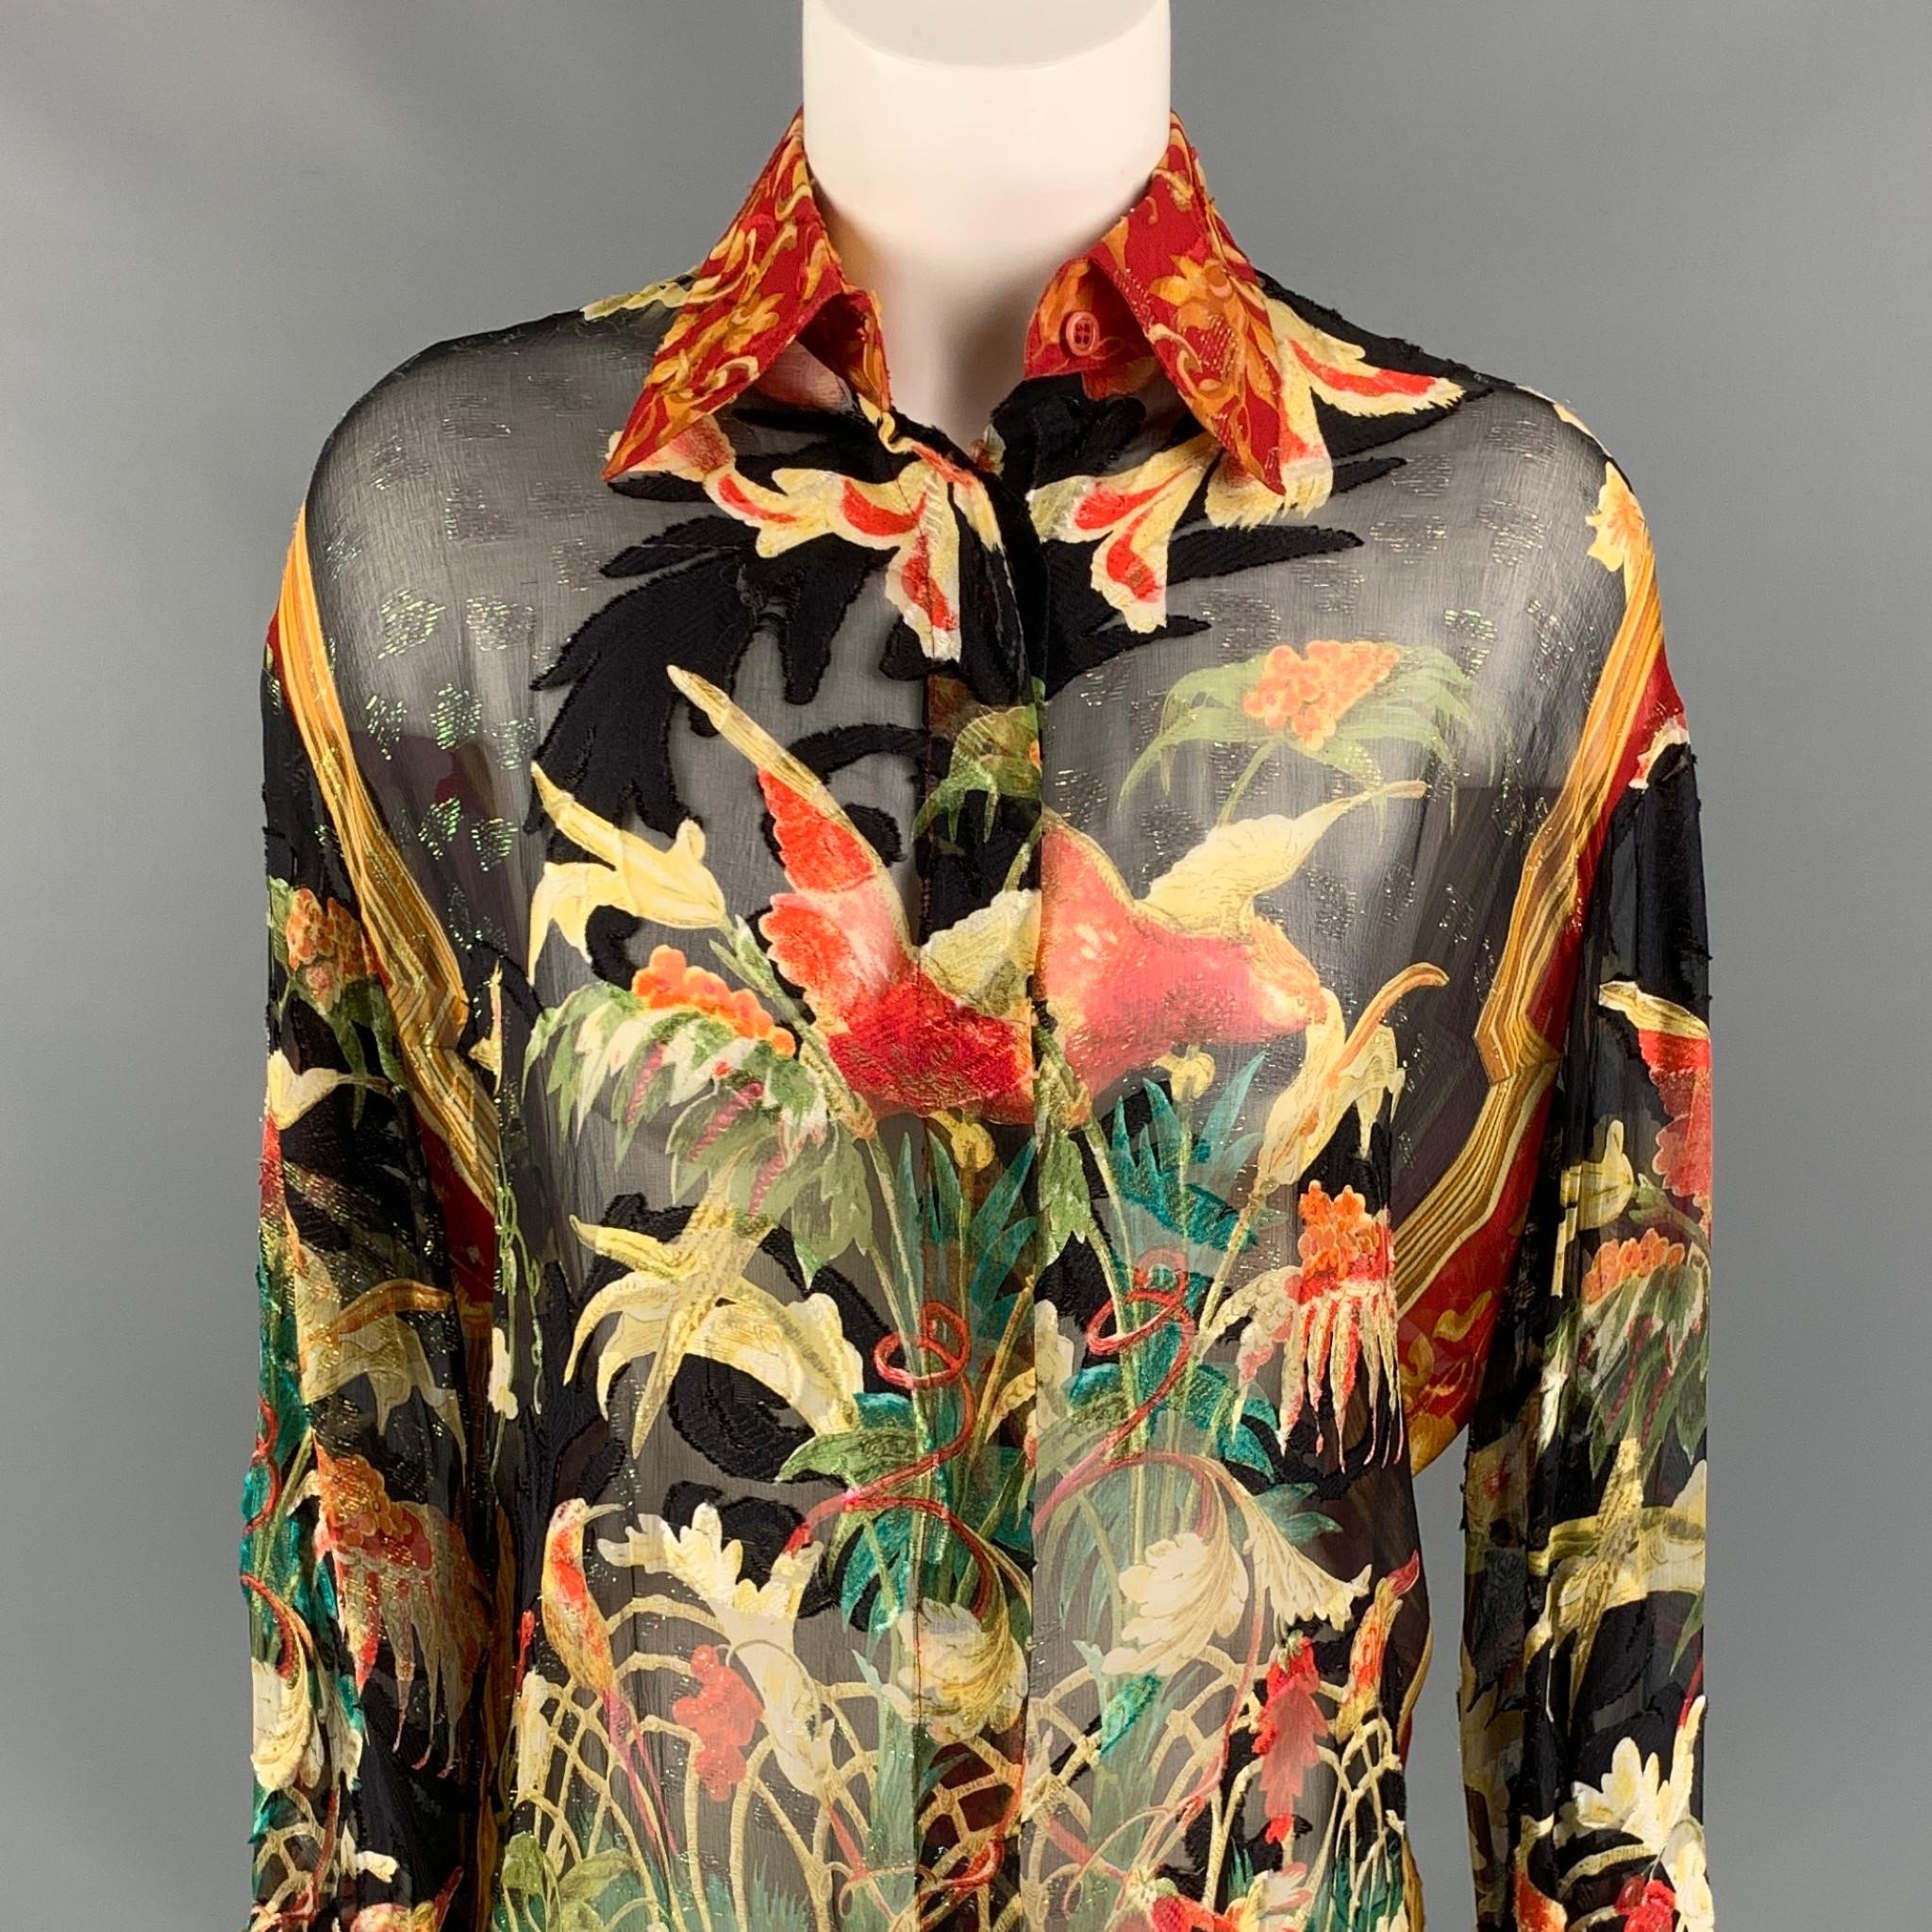 Vintage GIANFRANCO FERRE blouse comes in a multi-color see through floral silk featuring a oversized fit, spread collar, and a hidden button closure. Made in Italy. 

Very Good Pre-Owned Condition.
Marked: Size tag removed.

Measurements:

Shoulder: